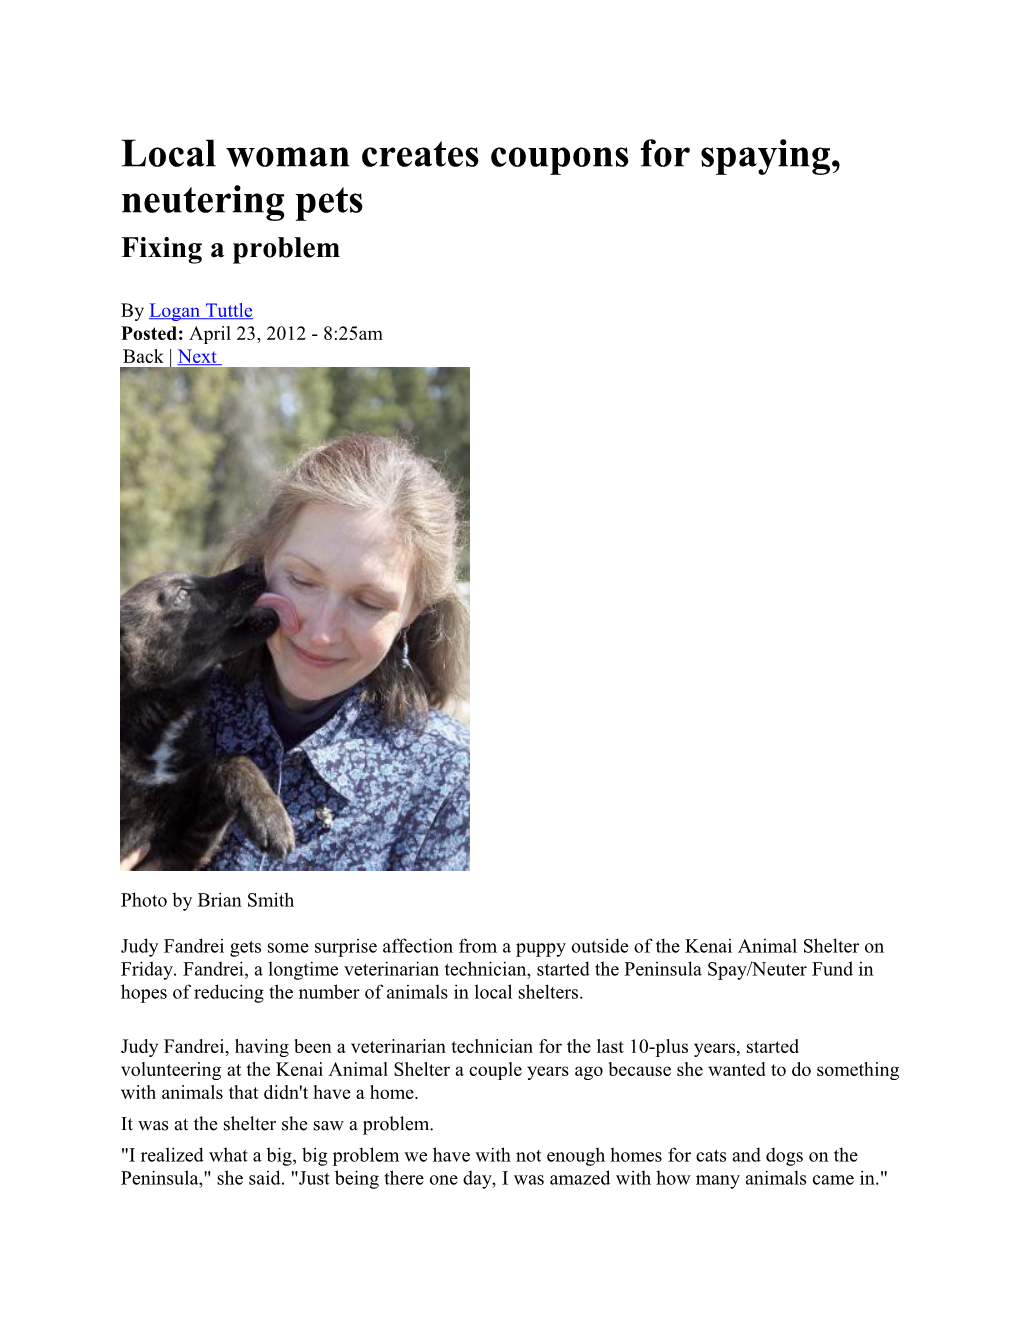 Local Woman Creates Coupons for Spaying, Neutering Pets